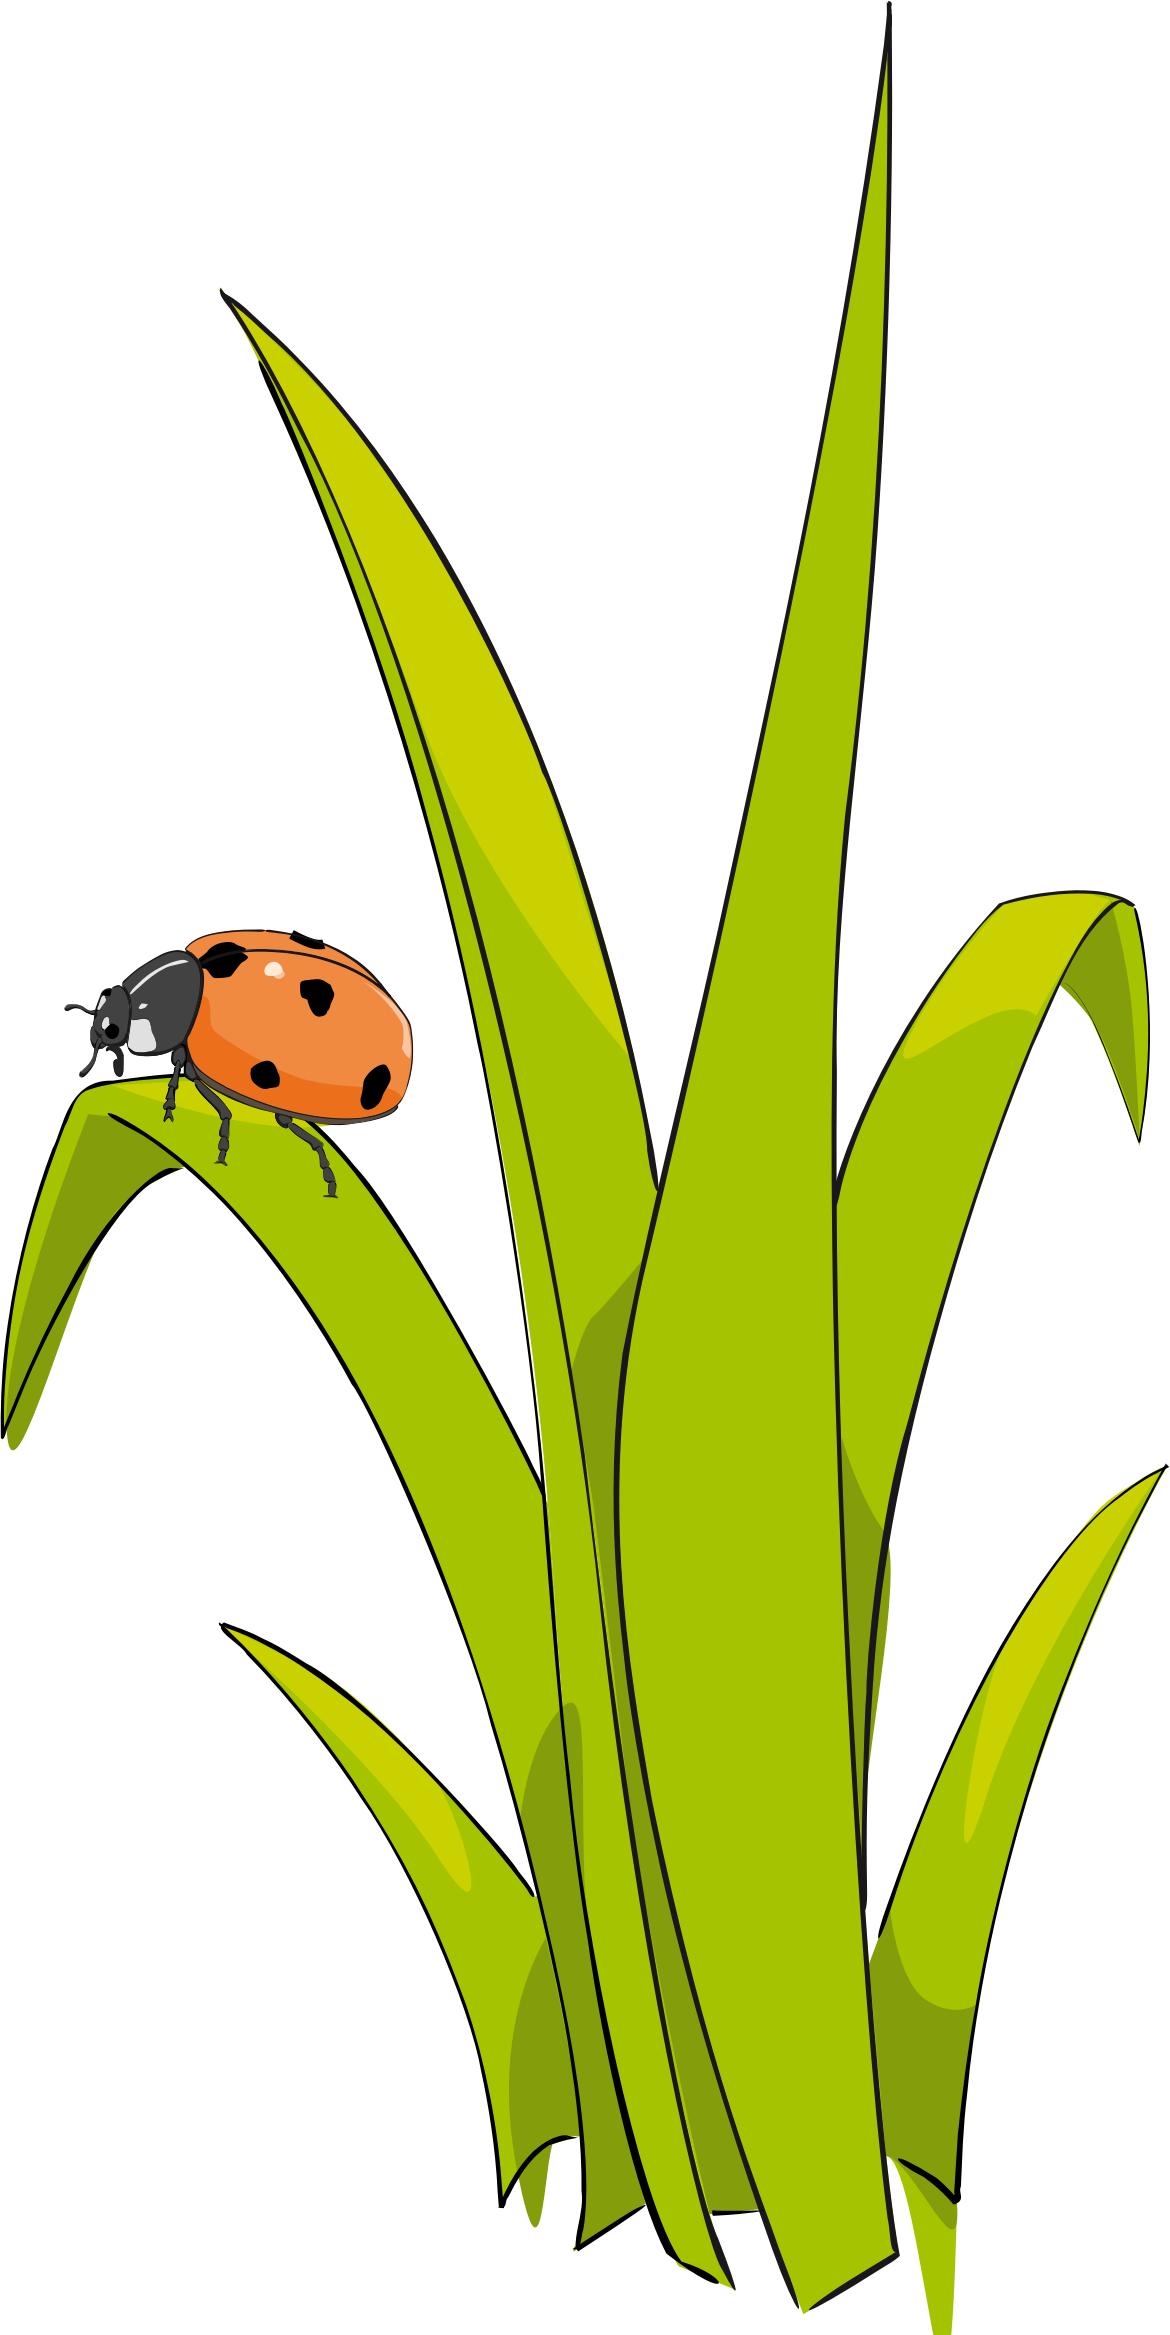 Coccinelle sur brin d-herbe - Ladybird on blade of grass. png